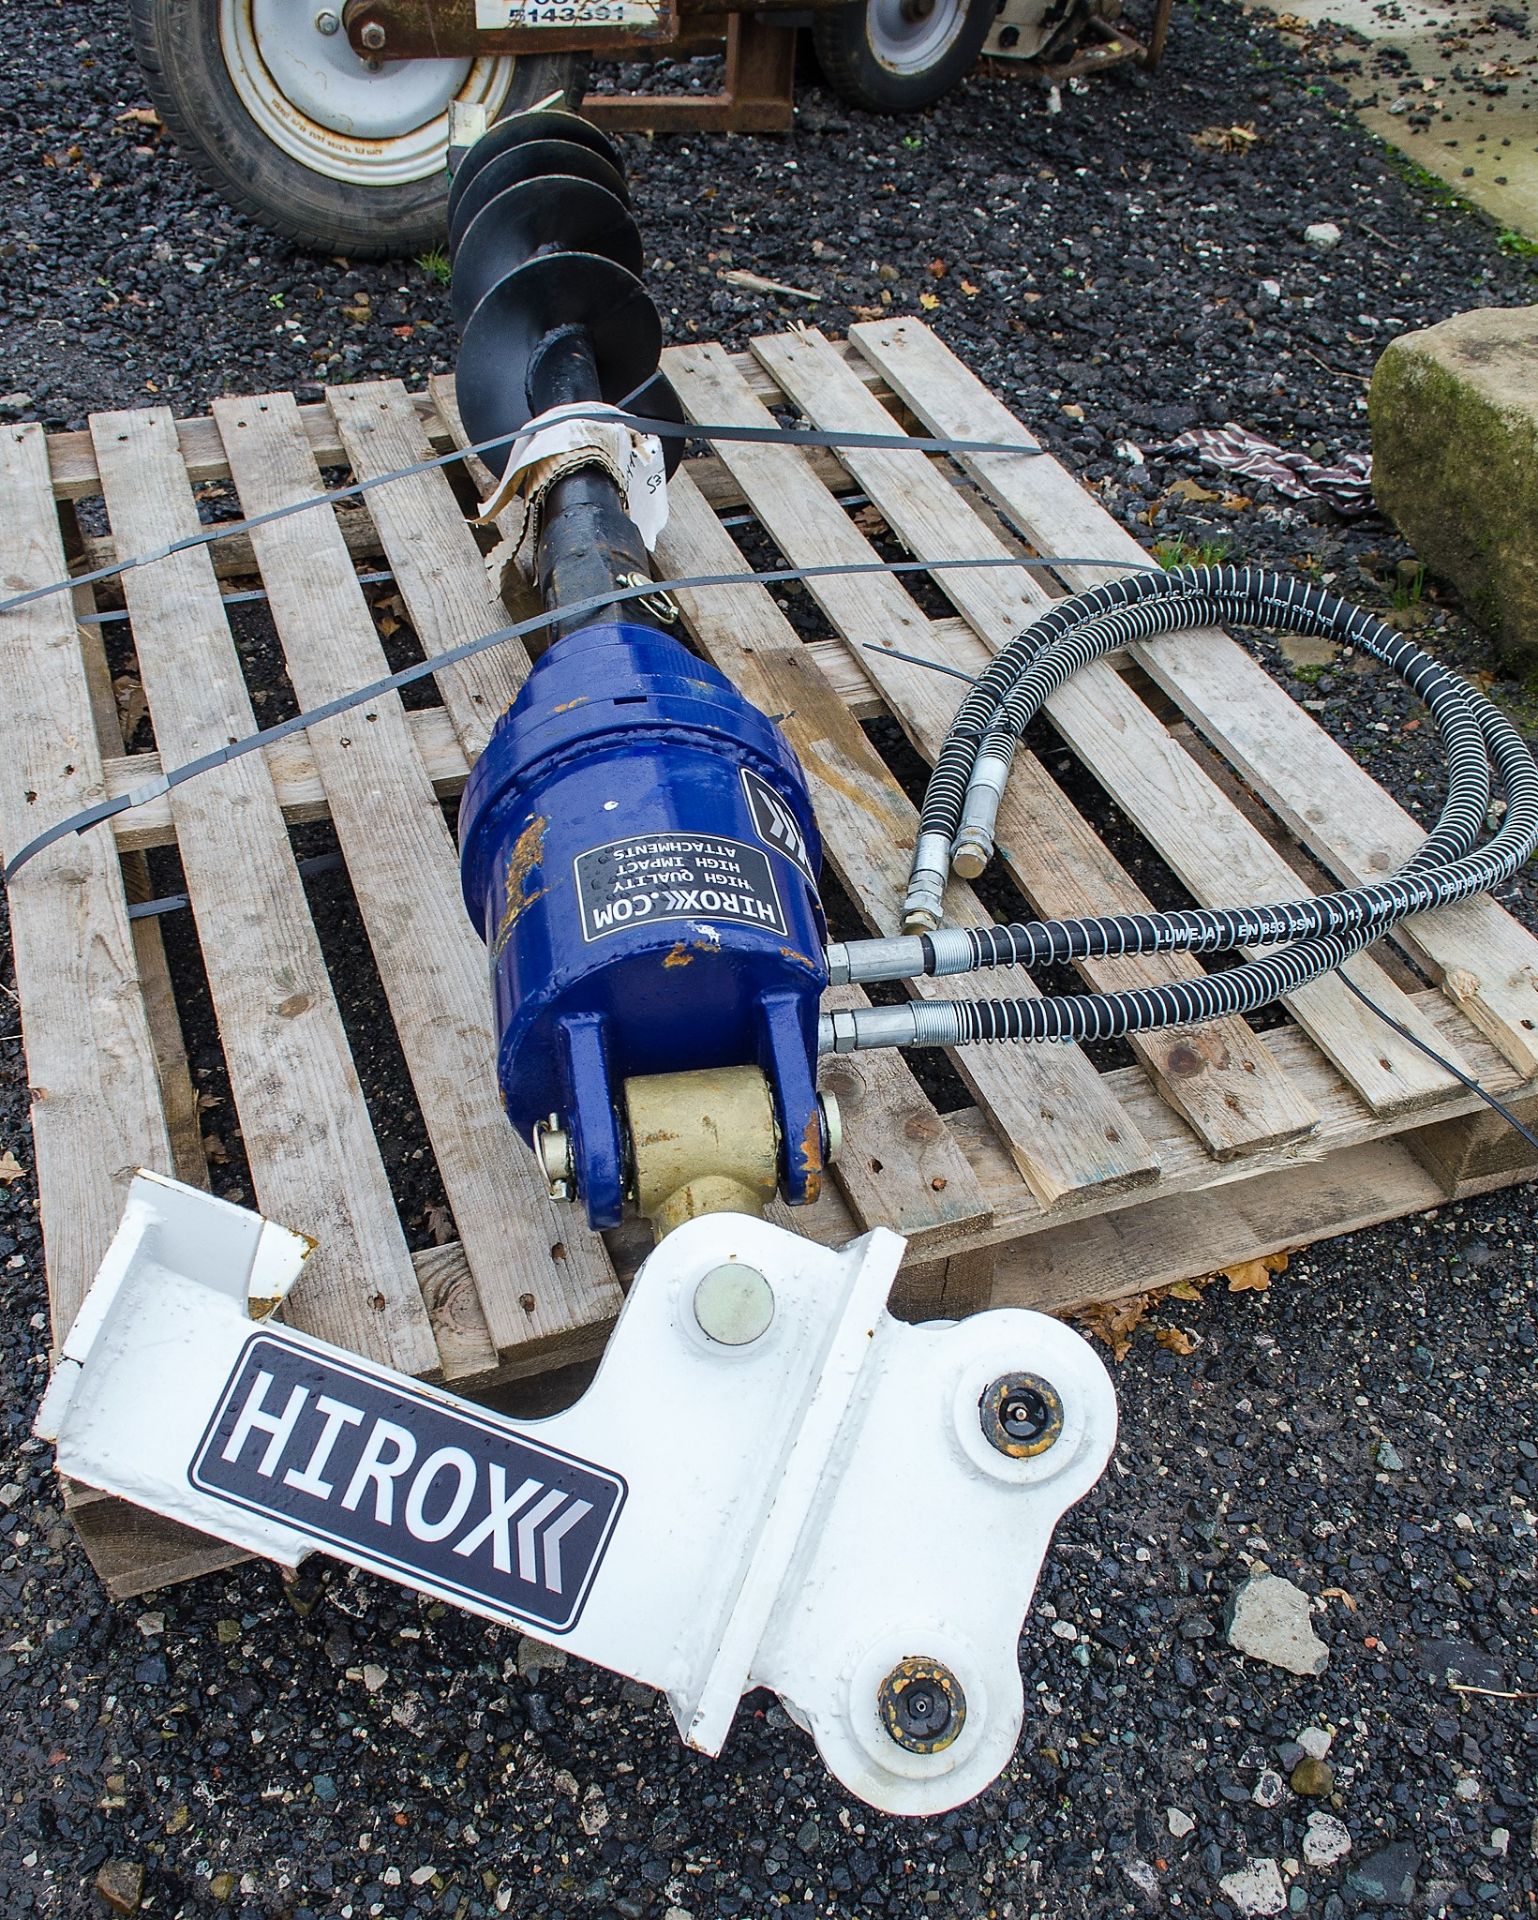 Hirox hydraulic post hole borer/auger drive to suit 3 tonne excavator c/w auger ** Unused ** - Image 2 of 4